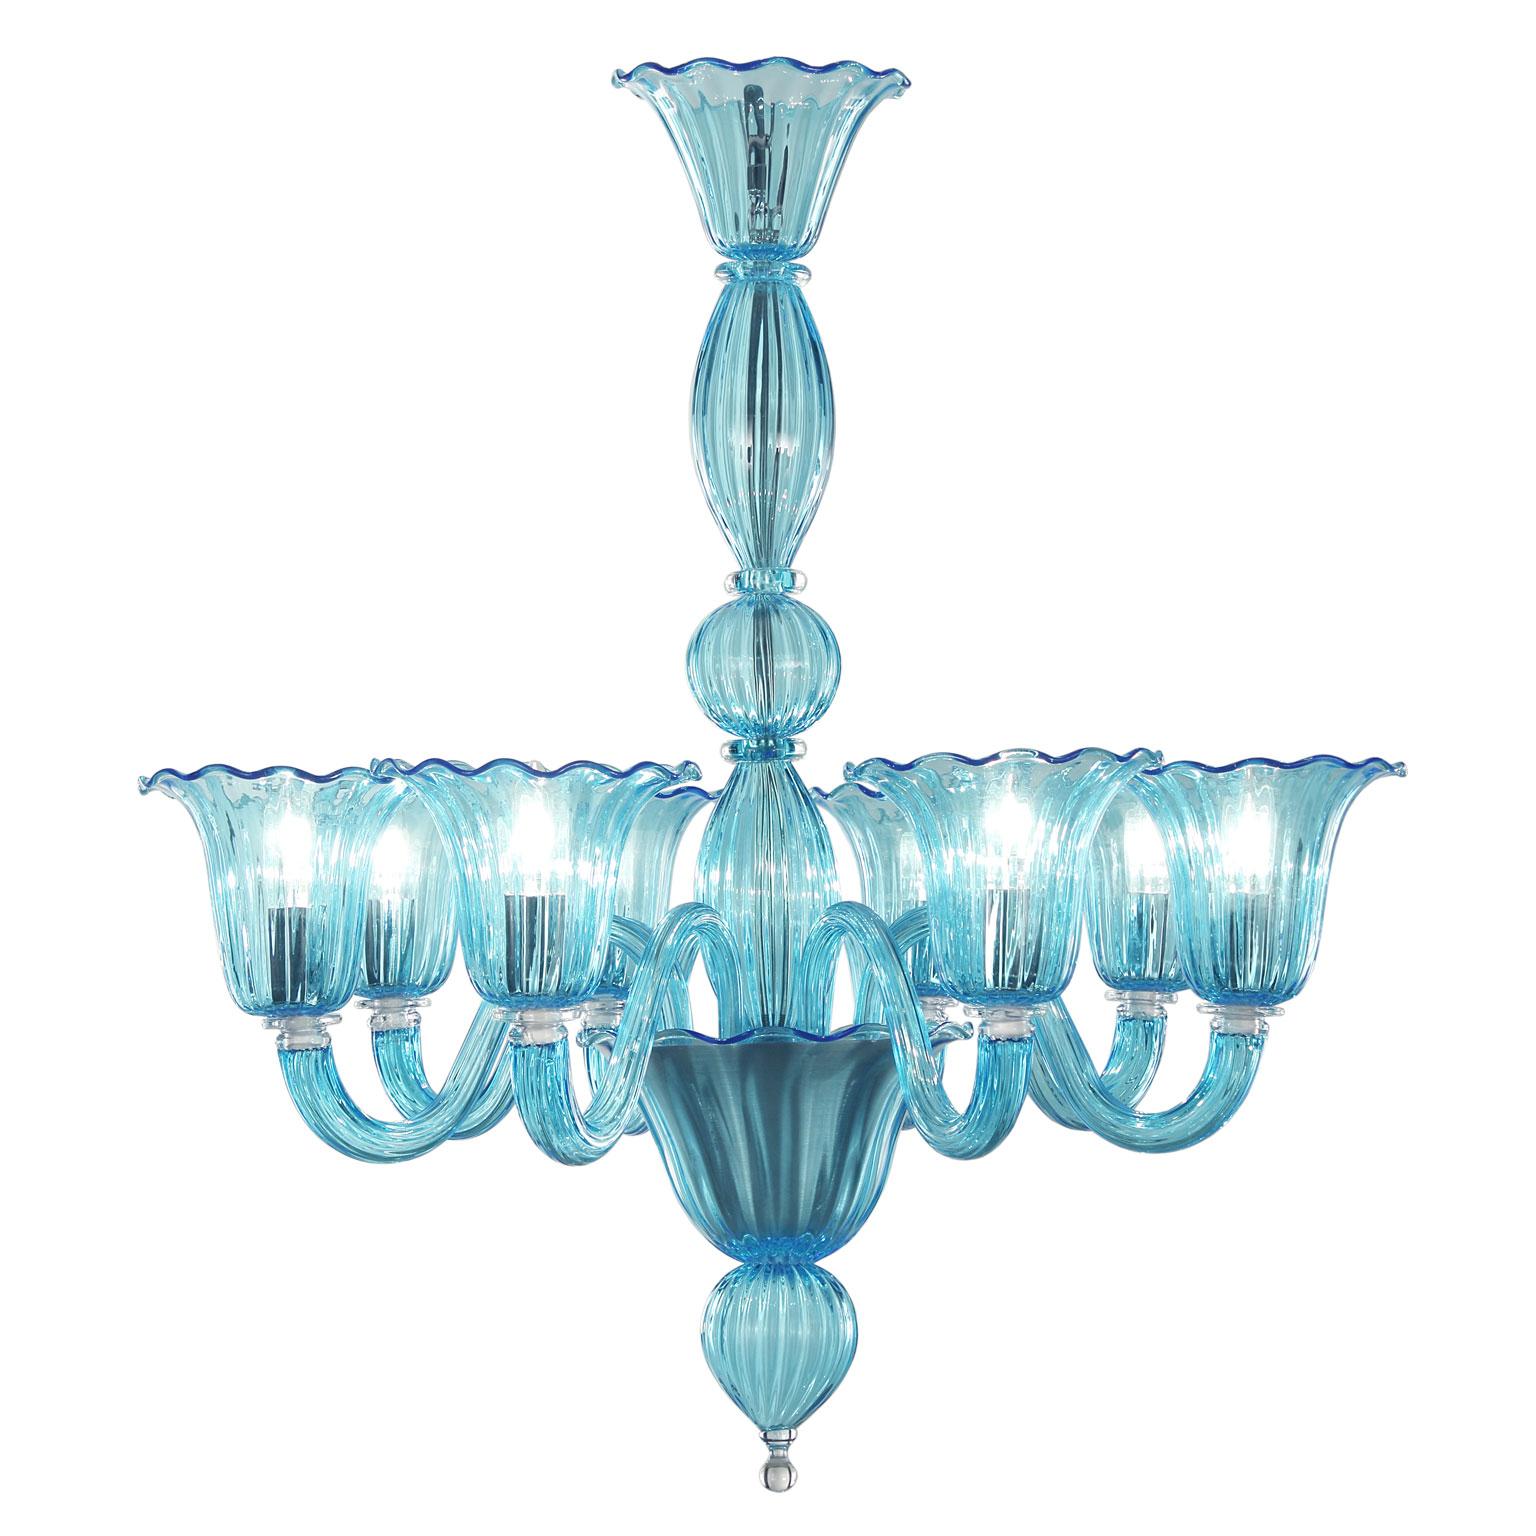 Bellepoque chandelier 8 lights, aquamarine color Murano glass upward lights by Multiforme.

Bellepoque 364 from the Timeless collection is a chandelier that evokes the atmosphere of the beginning of the 19th century. The cups recall floral elements,